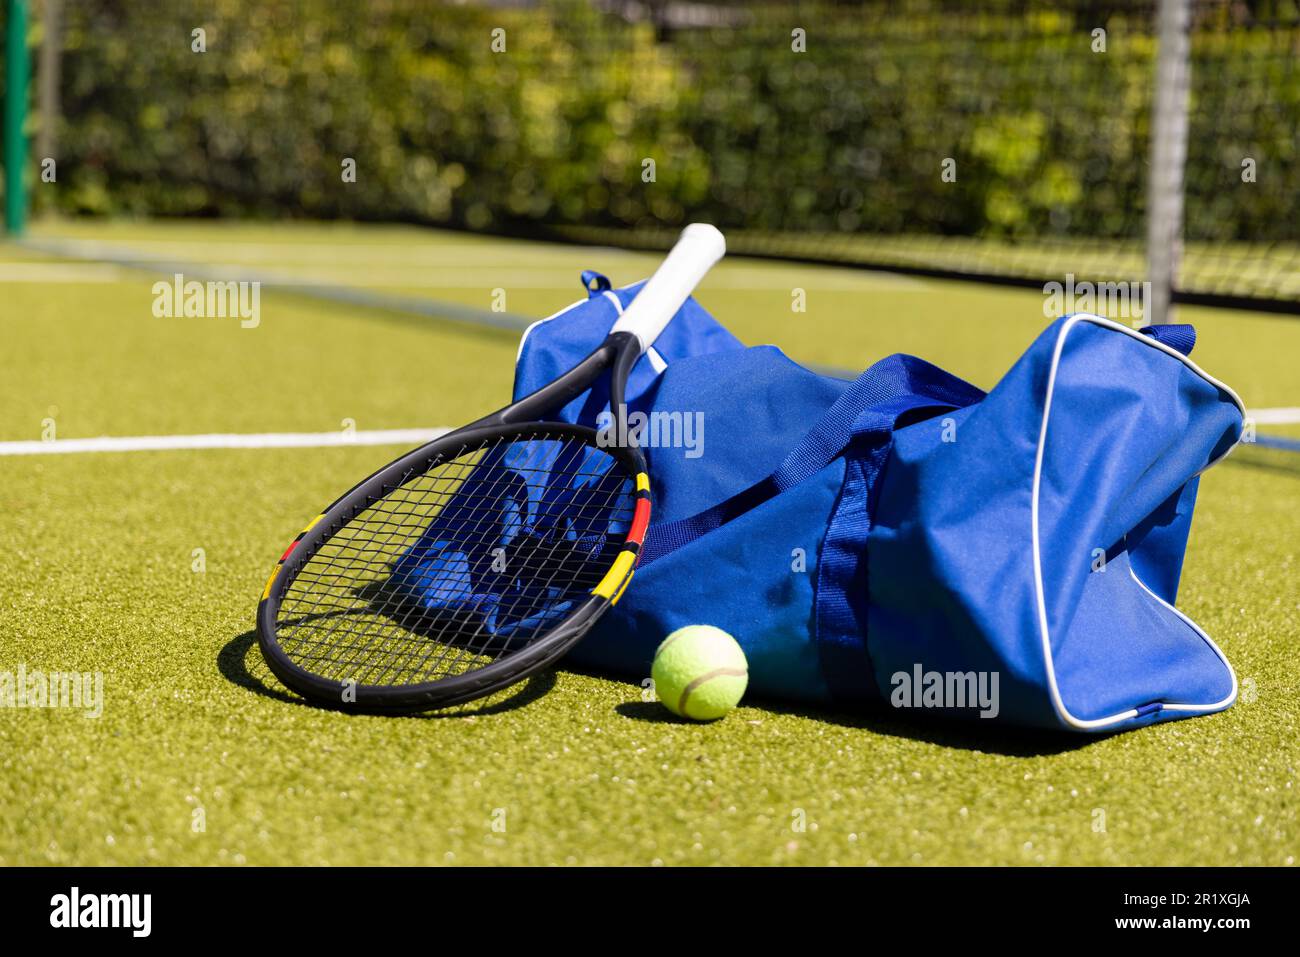 Sports Outdoors Tennis Racket Covers